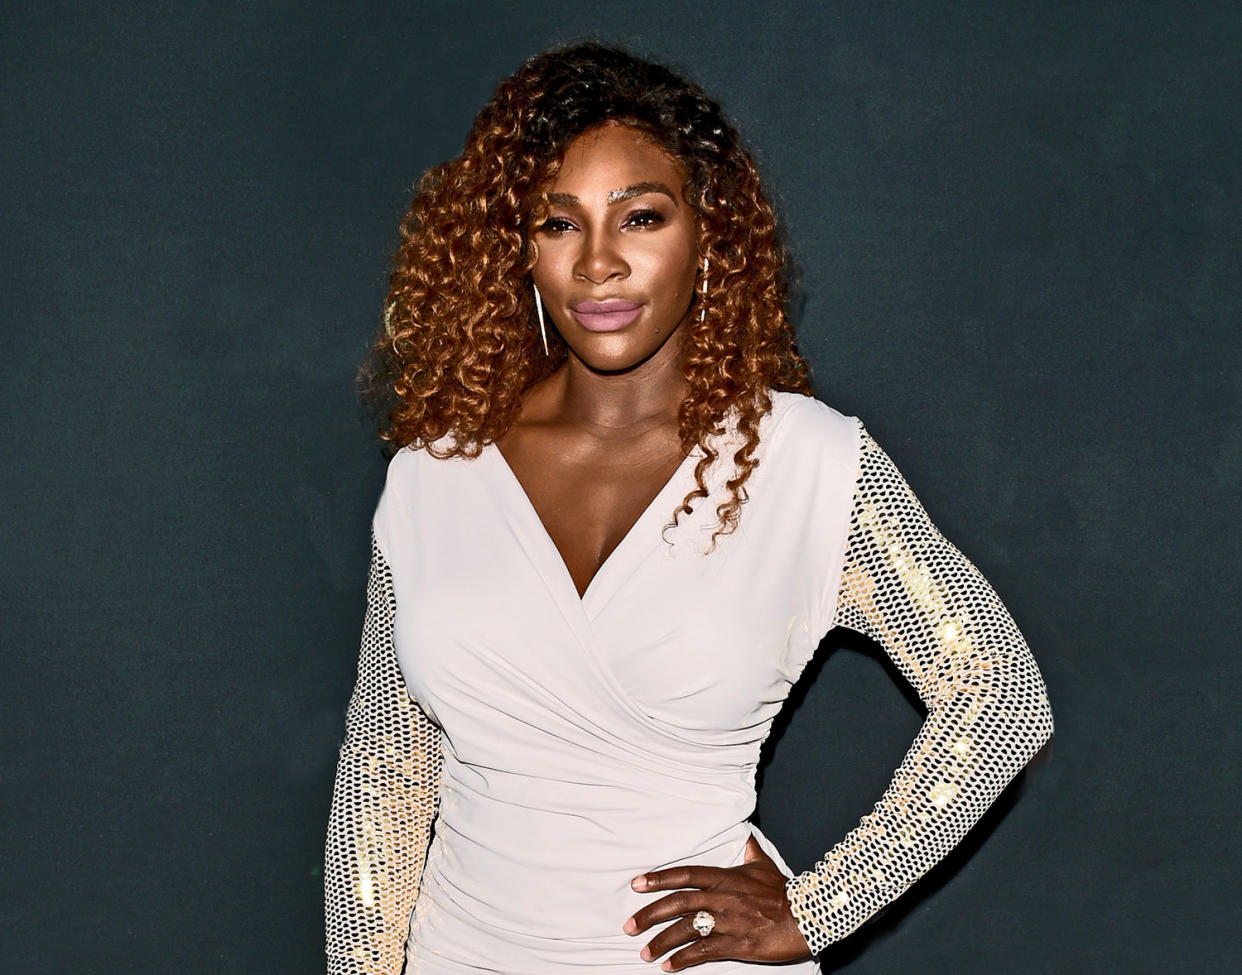 Serena Williams has the best advice for pregnant women on how to prepare emotionally for giving birth. (Photo: Andrew H. Walker/REX/Shutterstock)